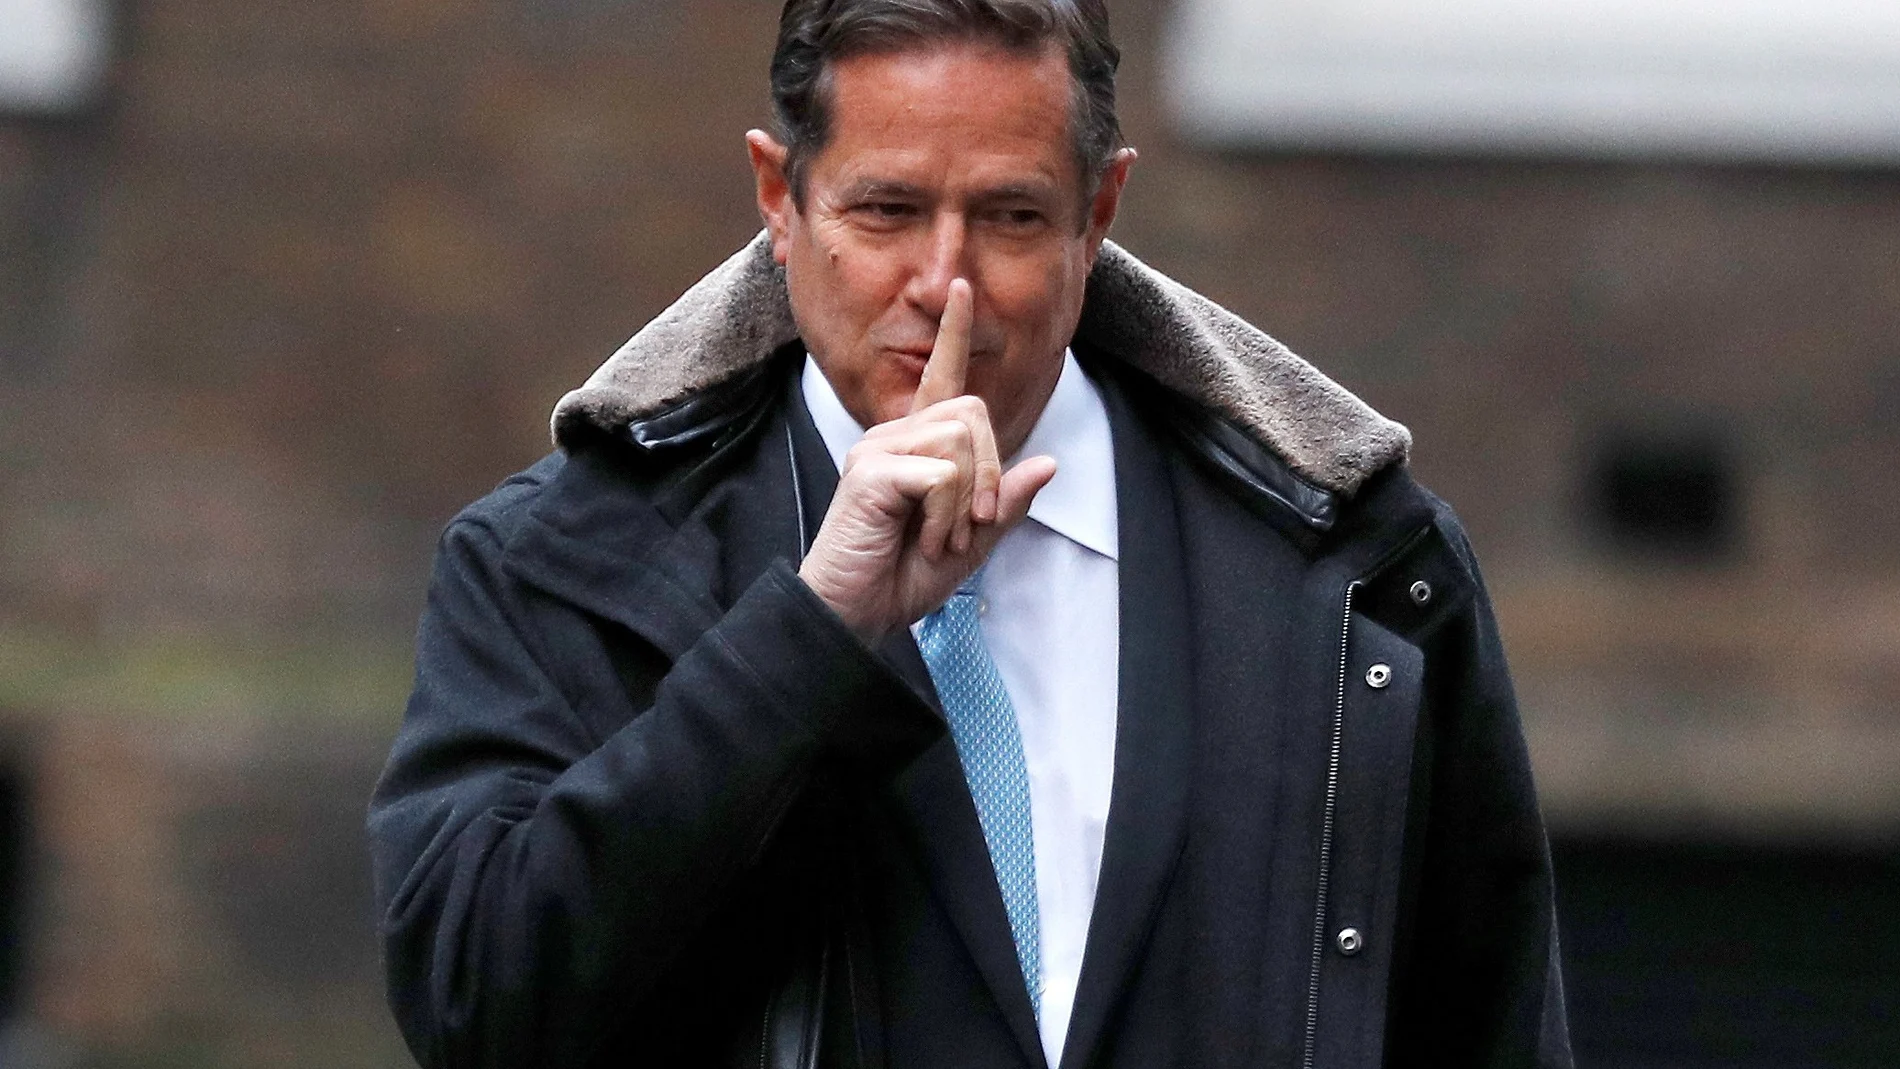 FILE PHOTO: Barclays' CEO Jes Staley arrives at 10 Downing Street in London, Britain January 11, 2018. REUTERS/Peter Nicholls/File Photo